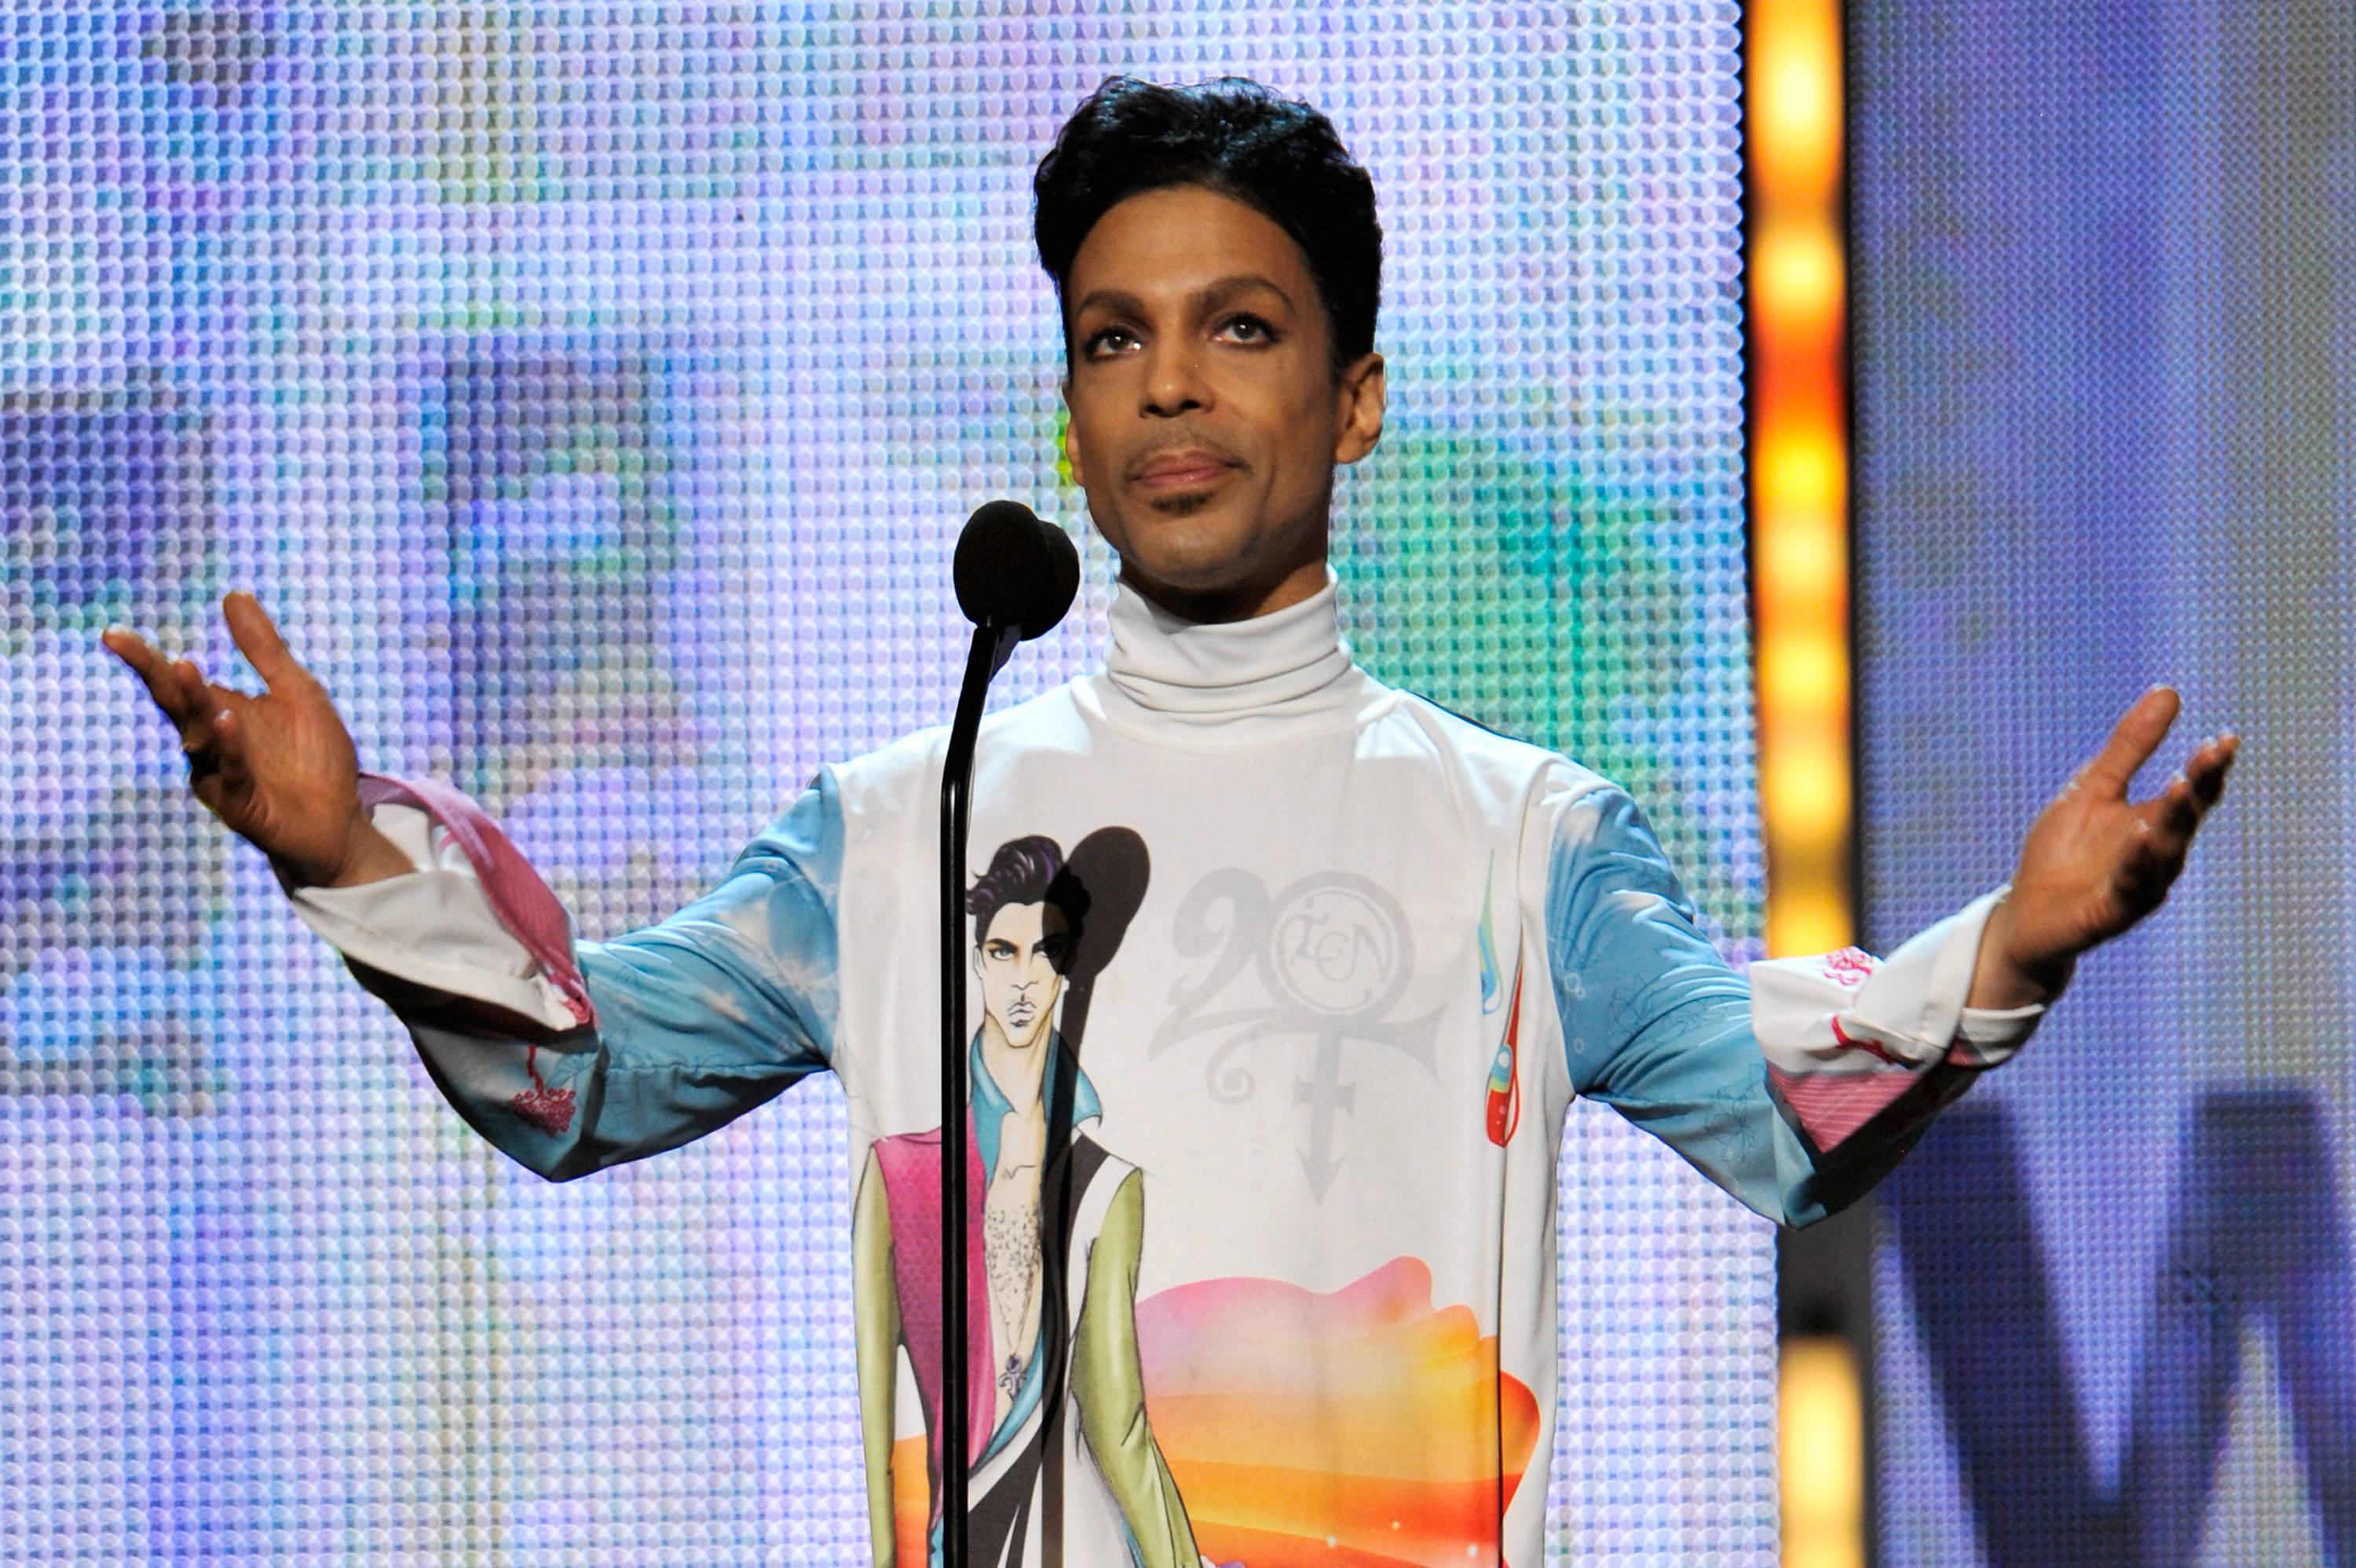 LOS ANGELES, CA - JUNE 27:  Prince onstage during the 2010 BET Awards held at the Shrine Auditorium on June 27, 2010 in Los Angeles, California.  (Photo by Kevin Mazur/WireImage)